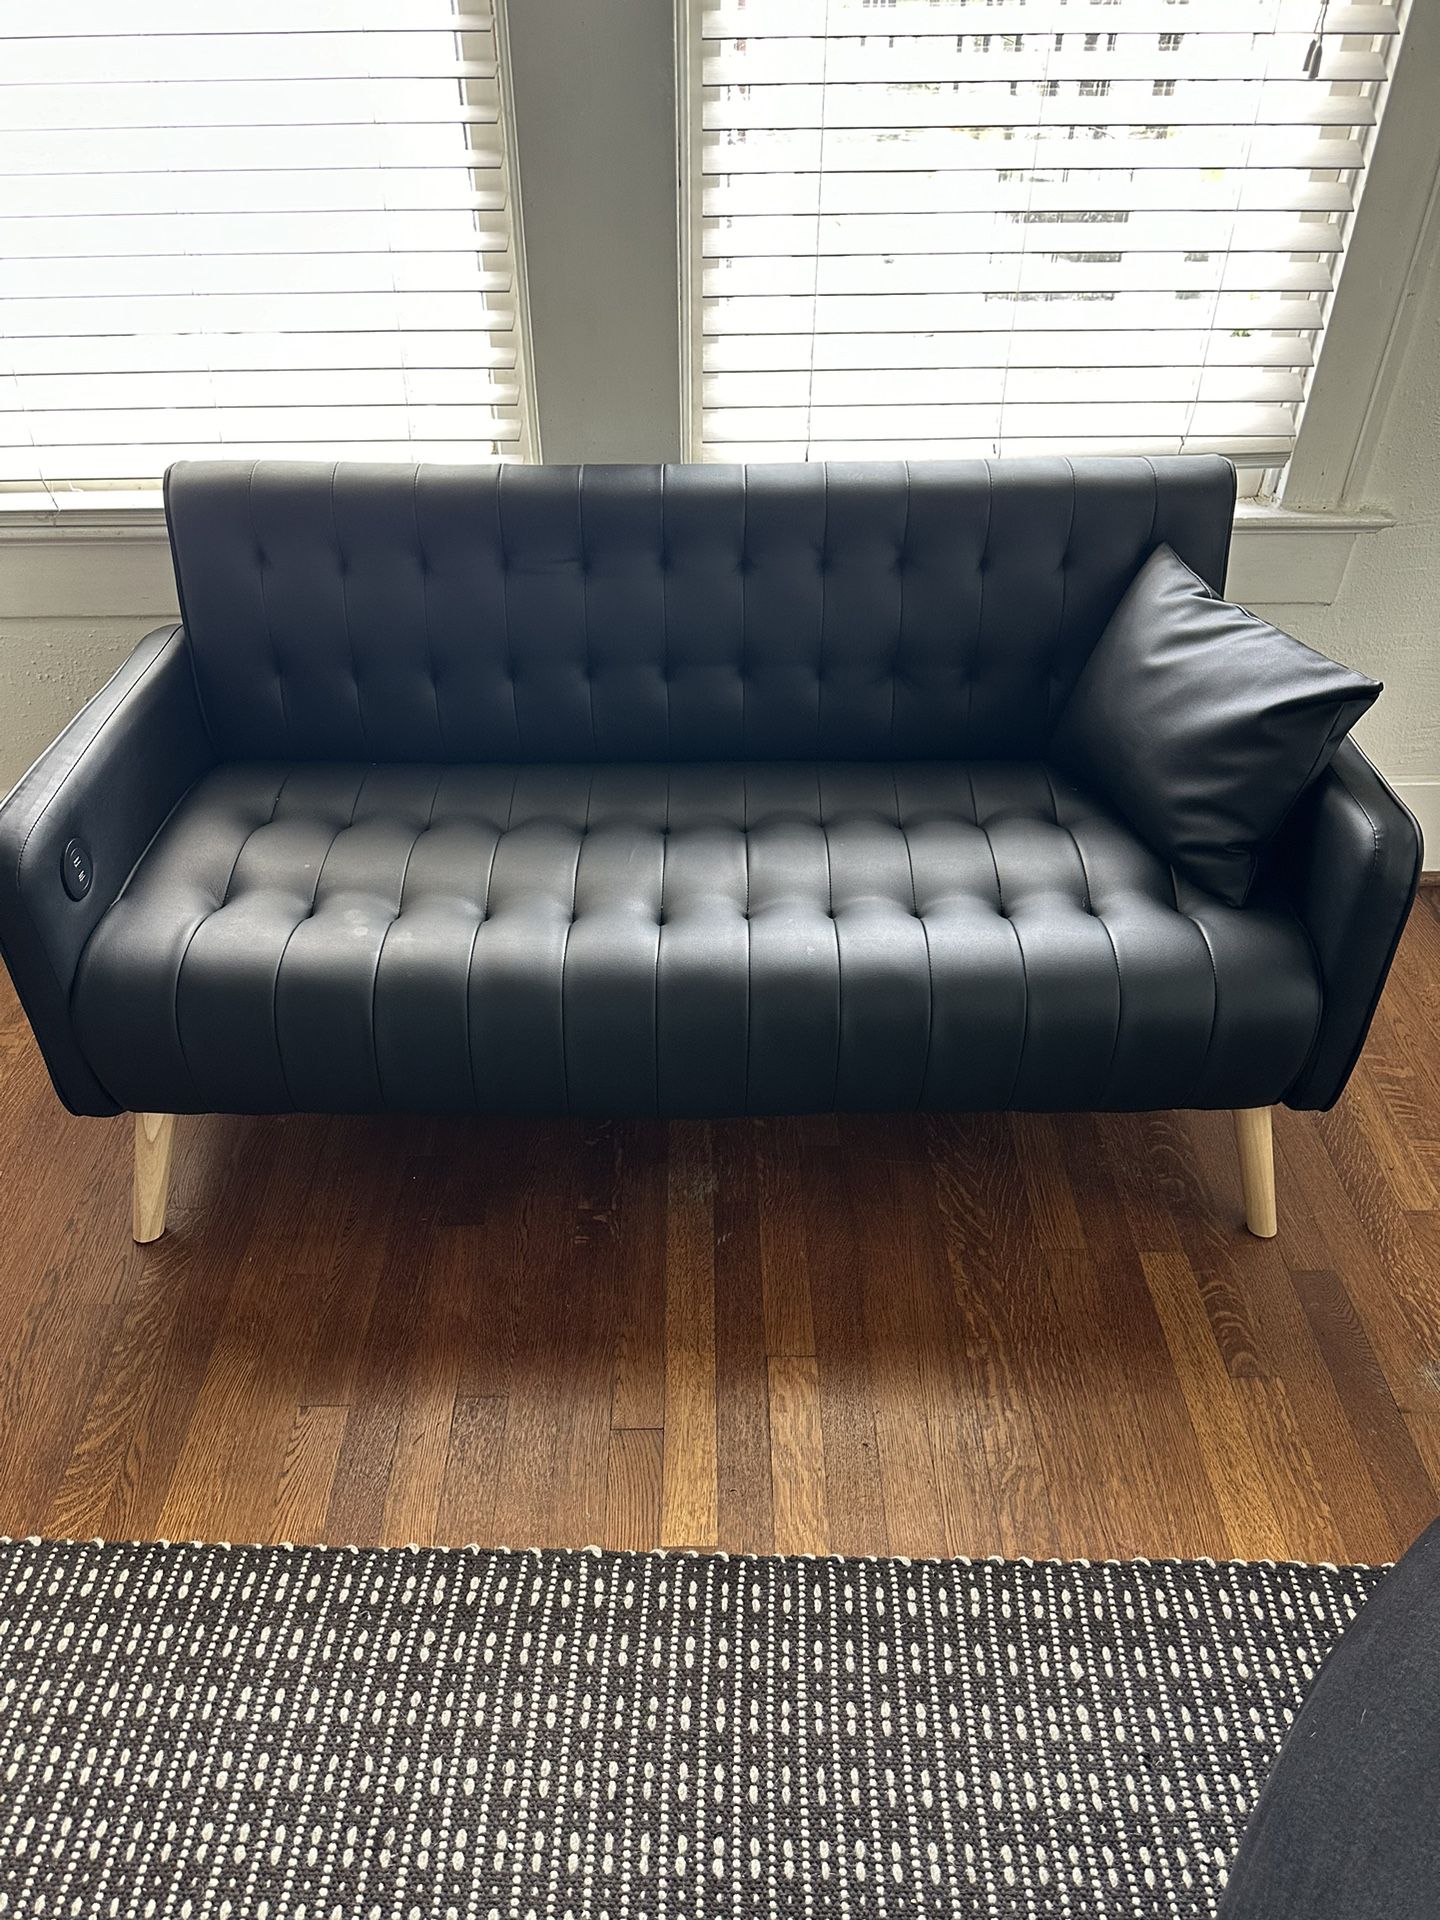 Black leather couch 